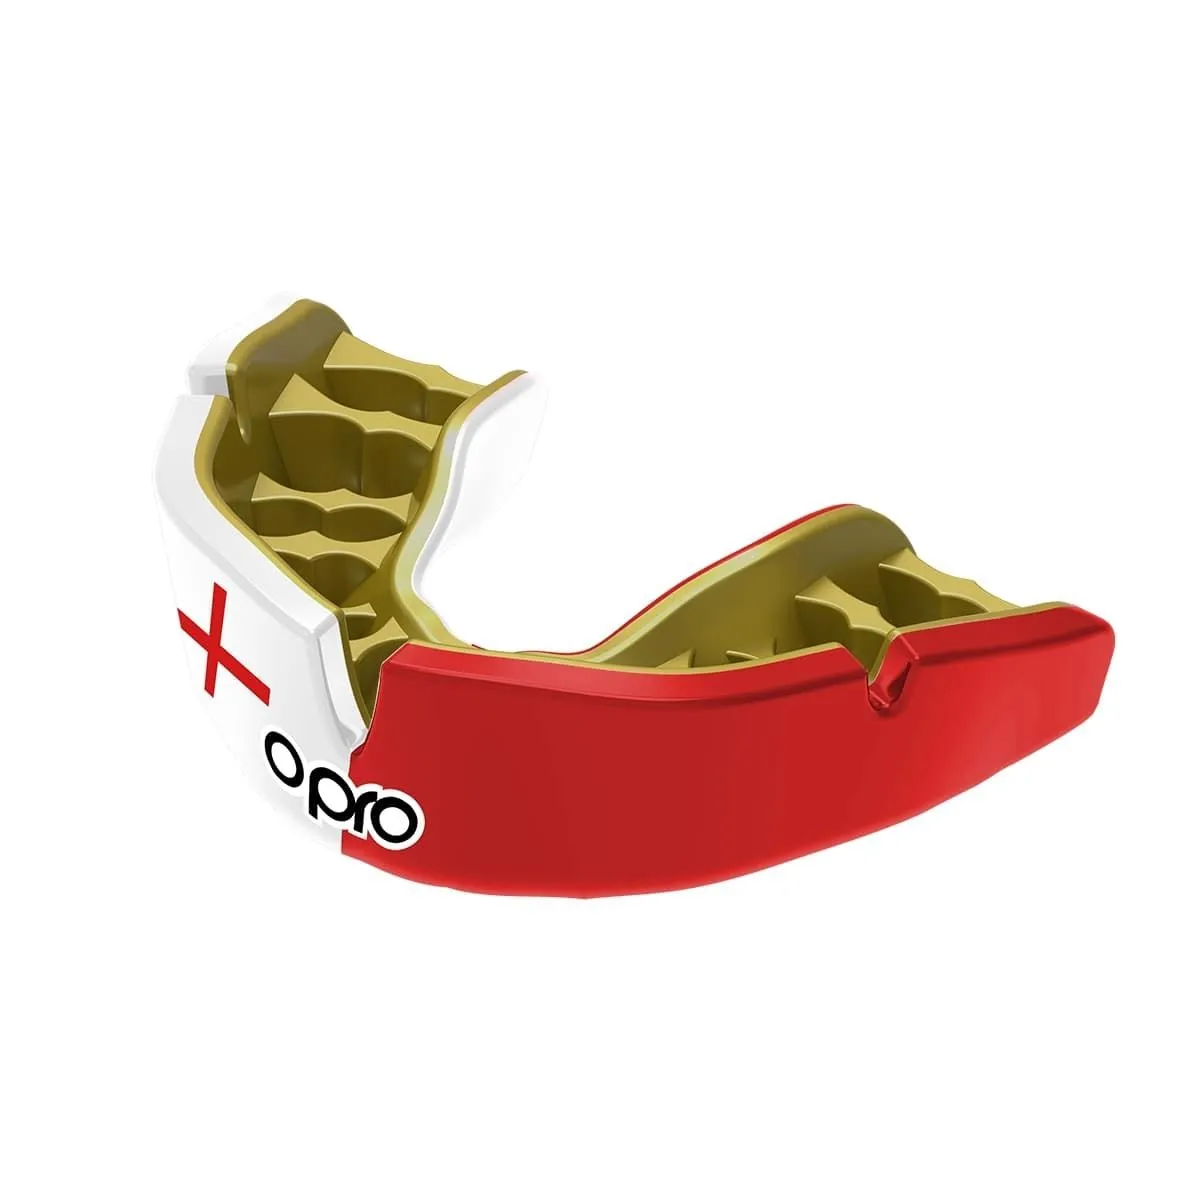 OPRO mouthguard Instant Custom Fit Countries Europe England